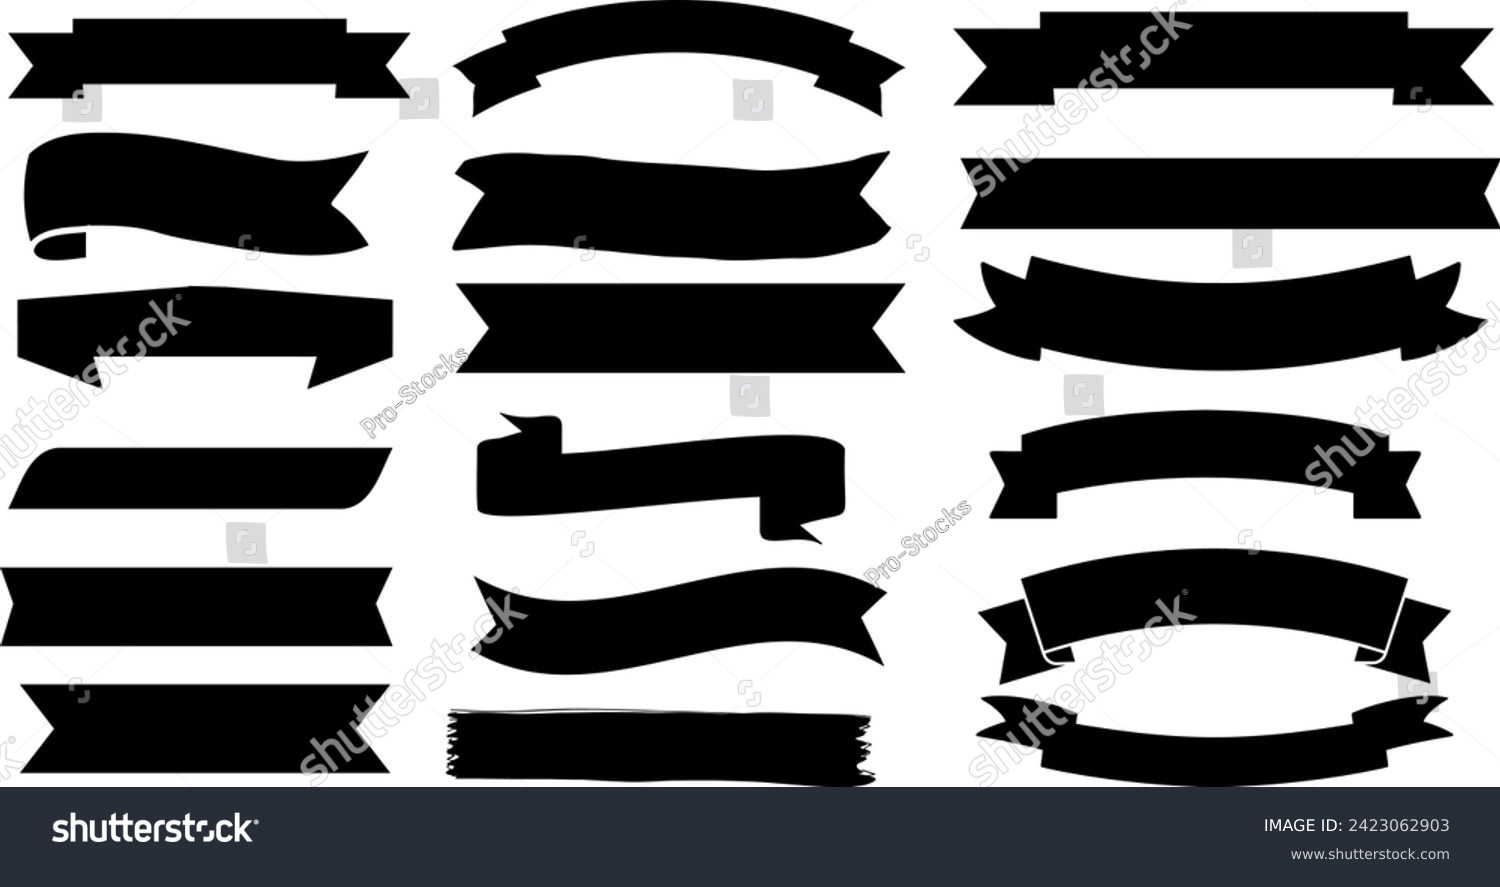 Black banner, ribbon silhouette vector set. Perfect for title, decoration, design. Editable, customizable. Bold shapes, modern to vintage styles. Straight edged, curved, waved designs #2423062903